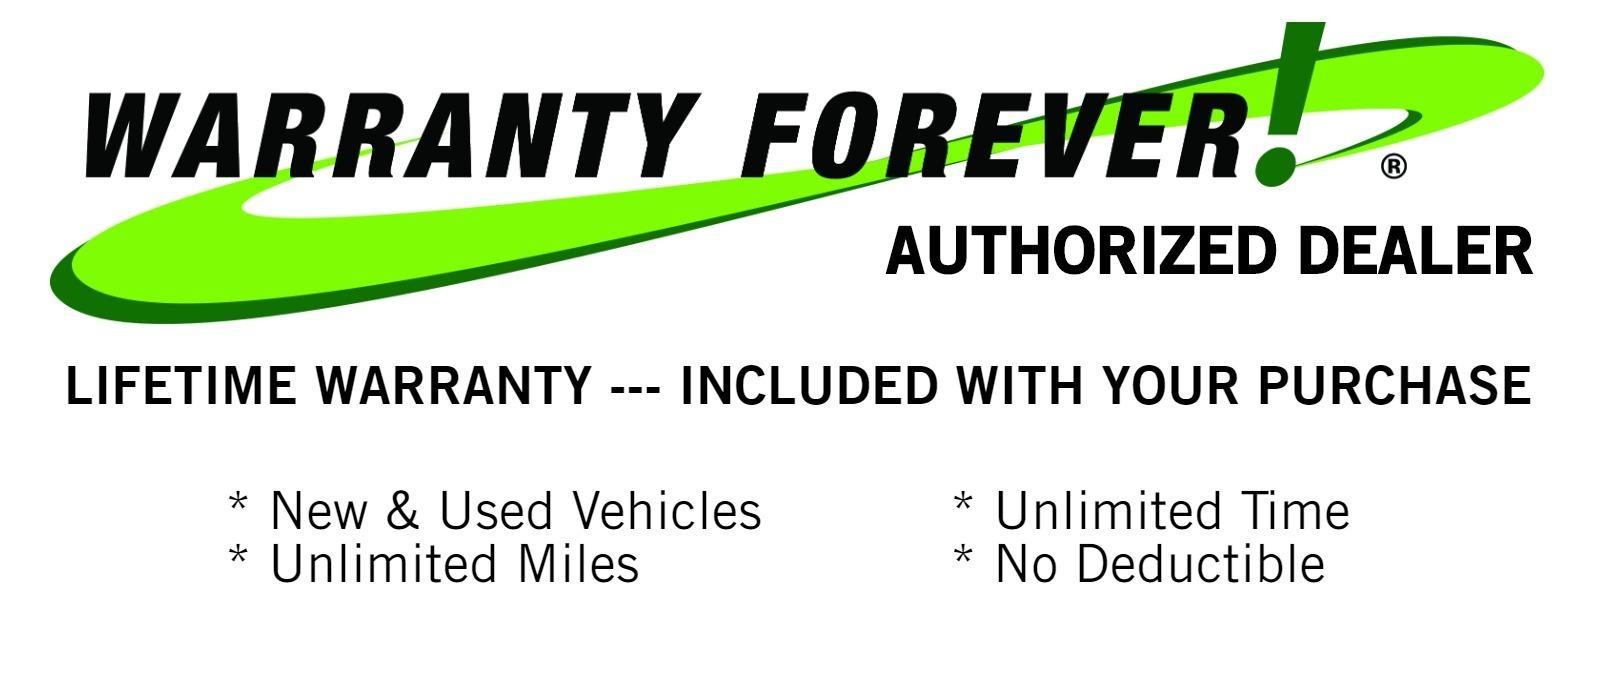 WARRANTY FOREVER AUTHORIZED DEALER
LIFETIME WARRANTY --- INCLUDED WITH YOUR PURCHASE

* New & Used Vehicles * Unlimited Time * Unlimited Miles * No Deductible